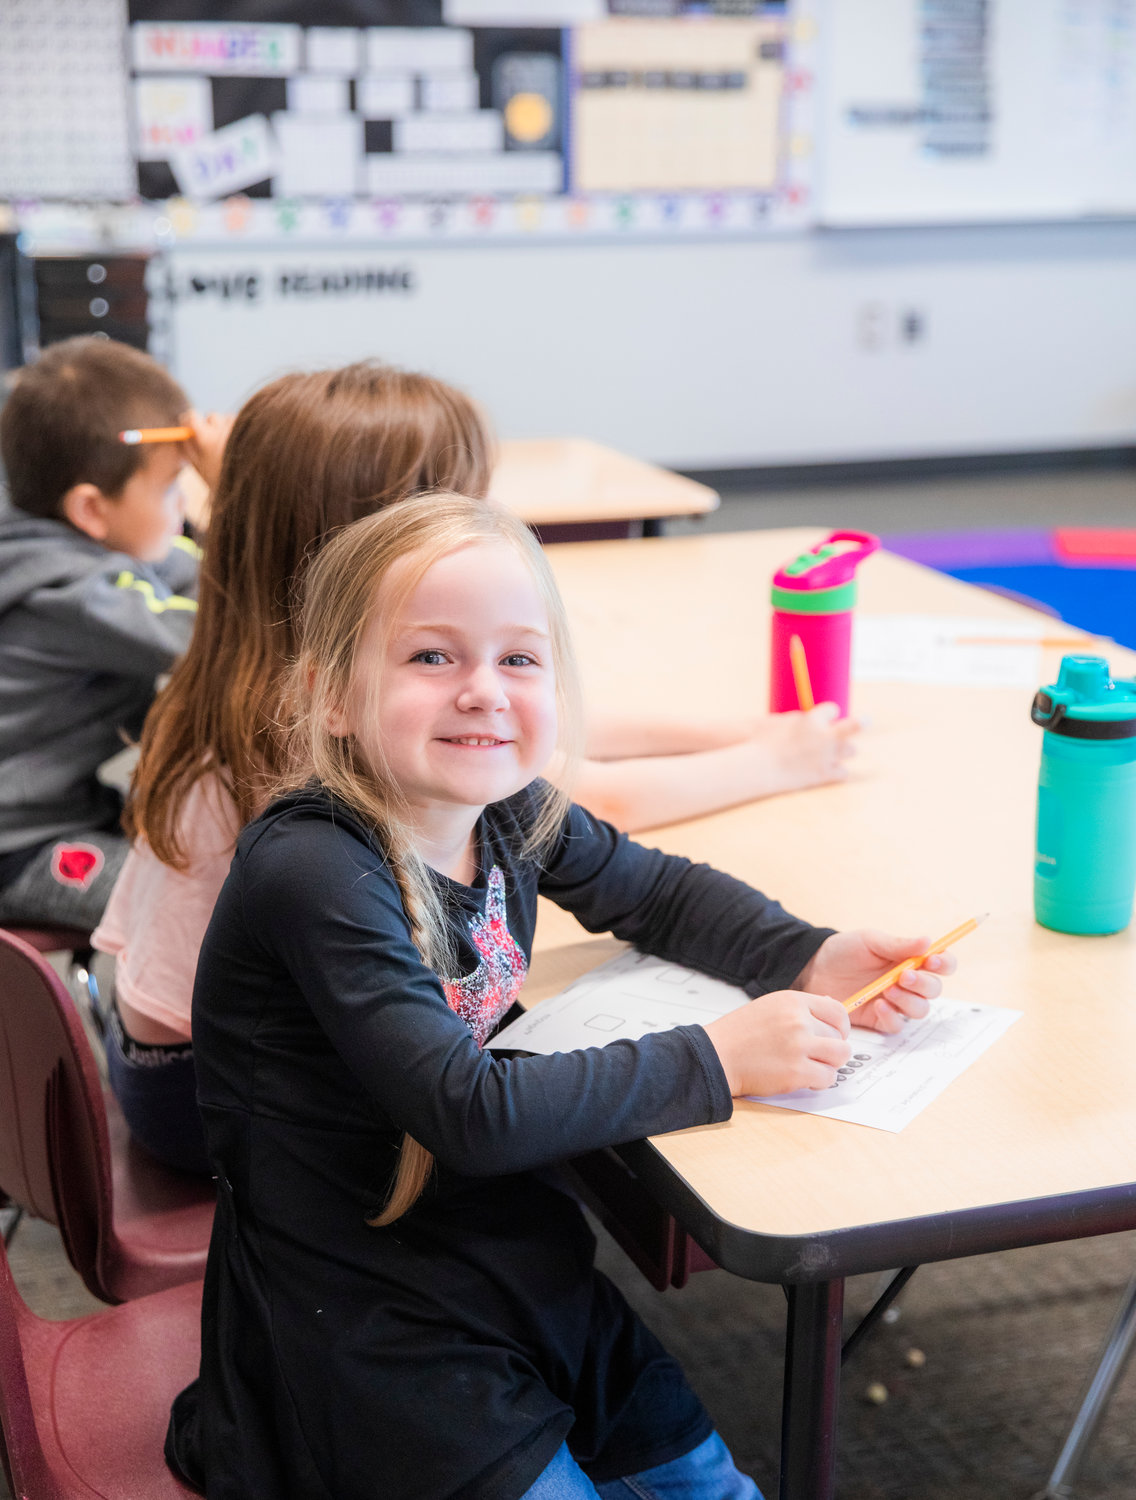 A student in Leslie Pagel’s first grade class smiles while attending class on Friday at James W. Lintott Elementary in Chehalis.